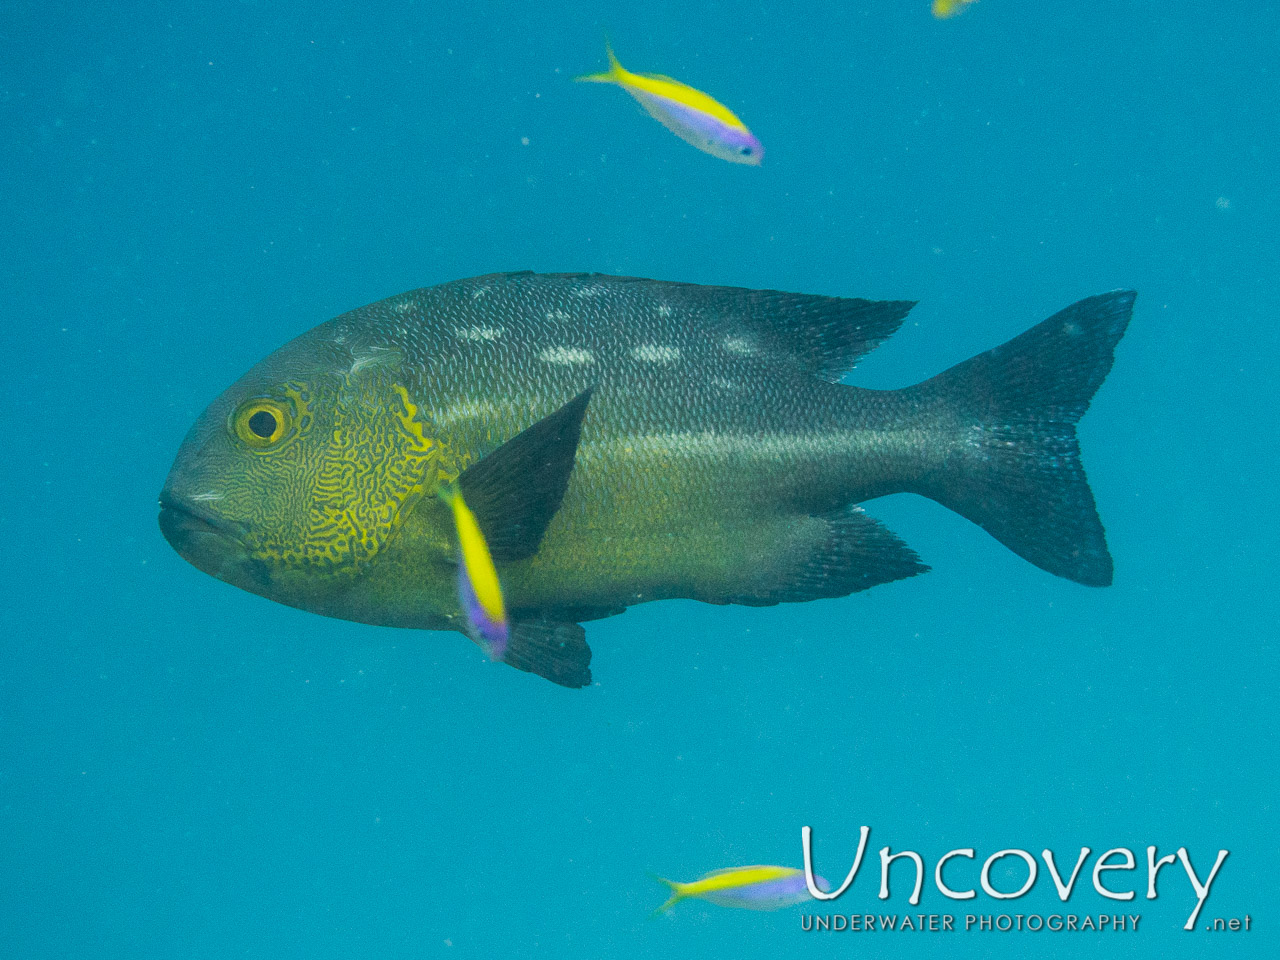 Midnight Snapper (macolor Macularis), photo taken in Maldives, Male Atoll, South Male Atoll, Biadhu Giri